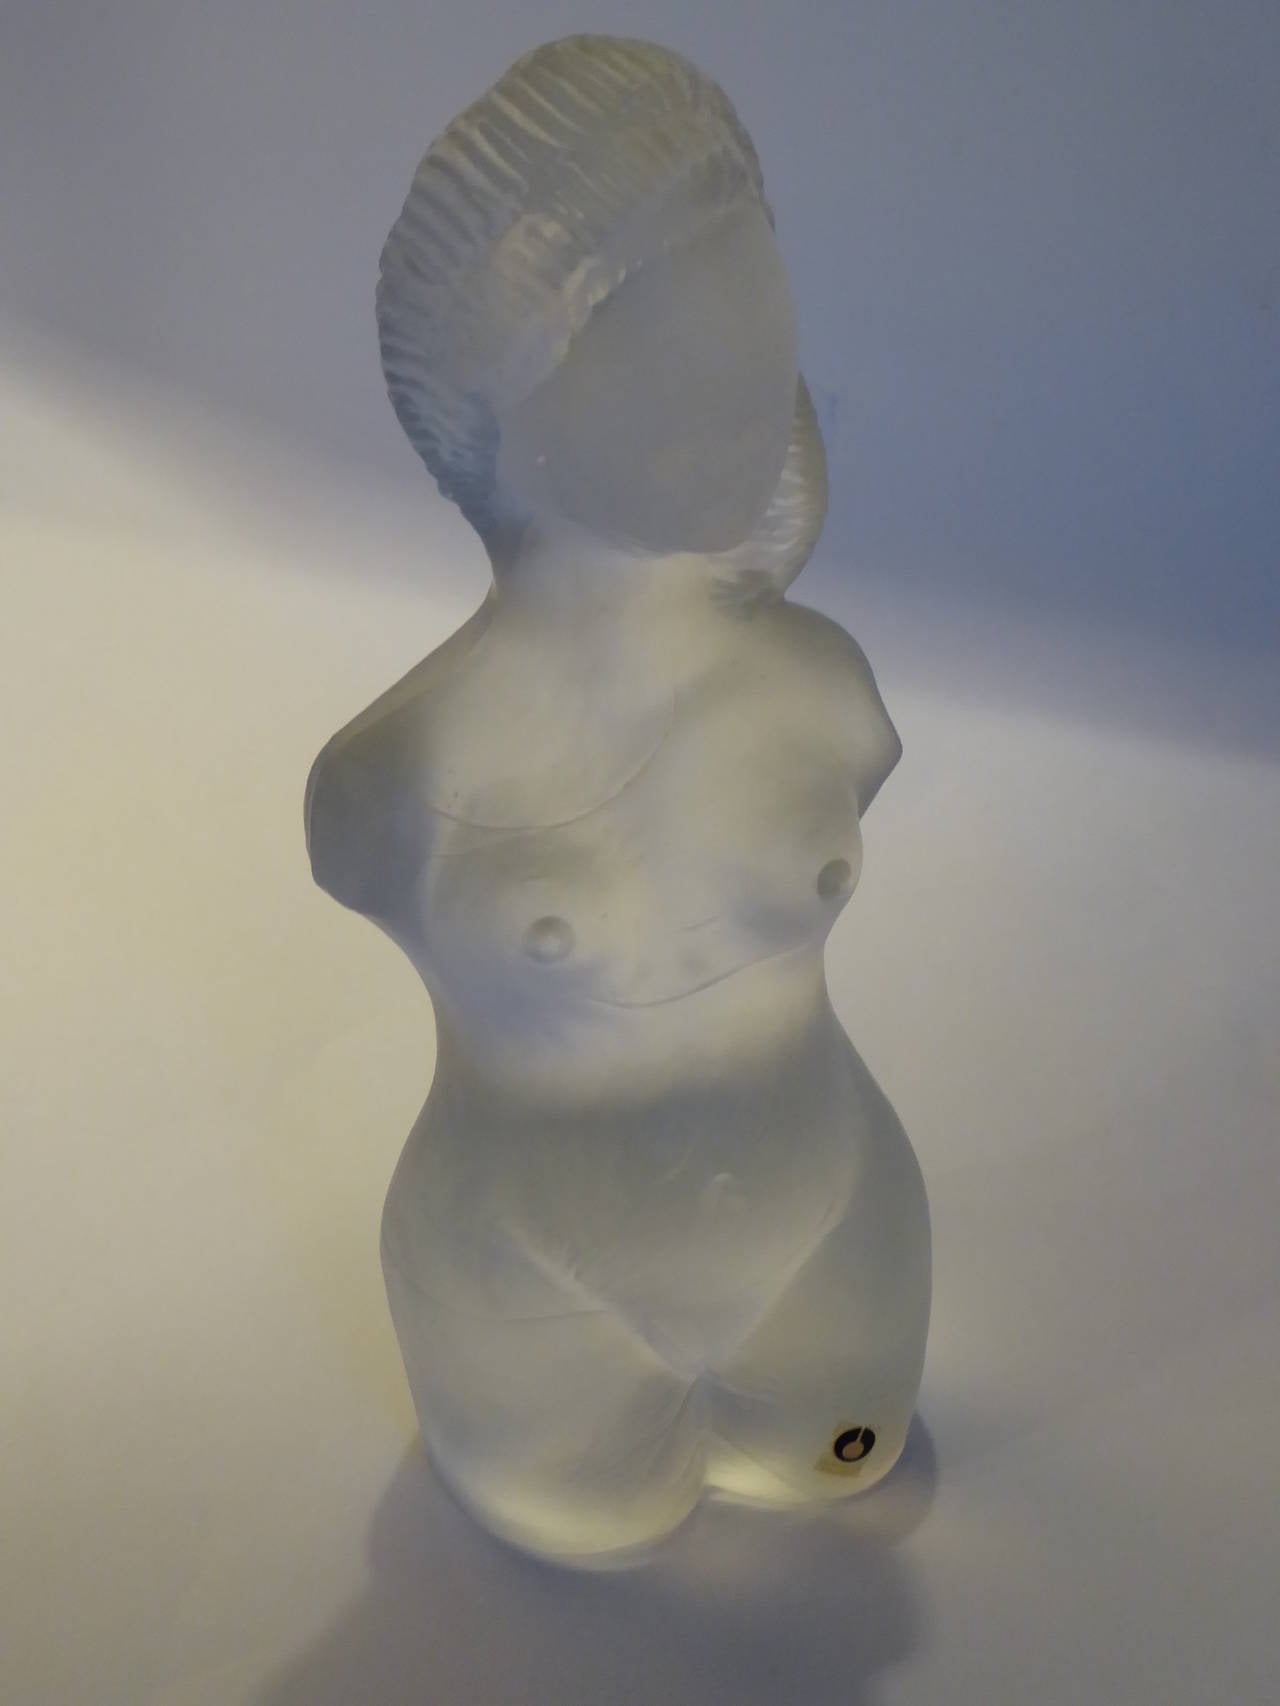 REDUCED FROM $235.
Great frosted glass sculpture of a nude woman by Uno Westerberg for Pukebergs Glasbruk in Nybro, Sweden. Retains Pukeberg label. 

Pukebergs Glasbruk was founded in 1871 and continues producing wares today. Uno Westerberg worked